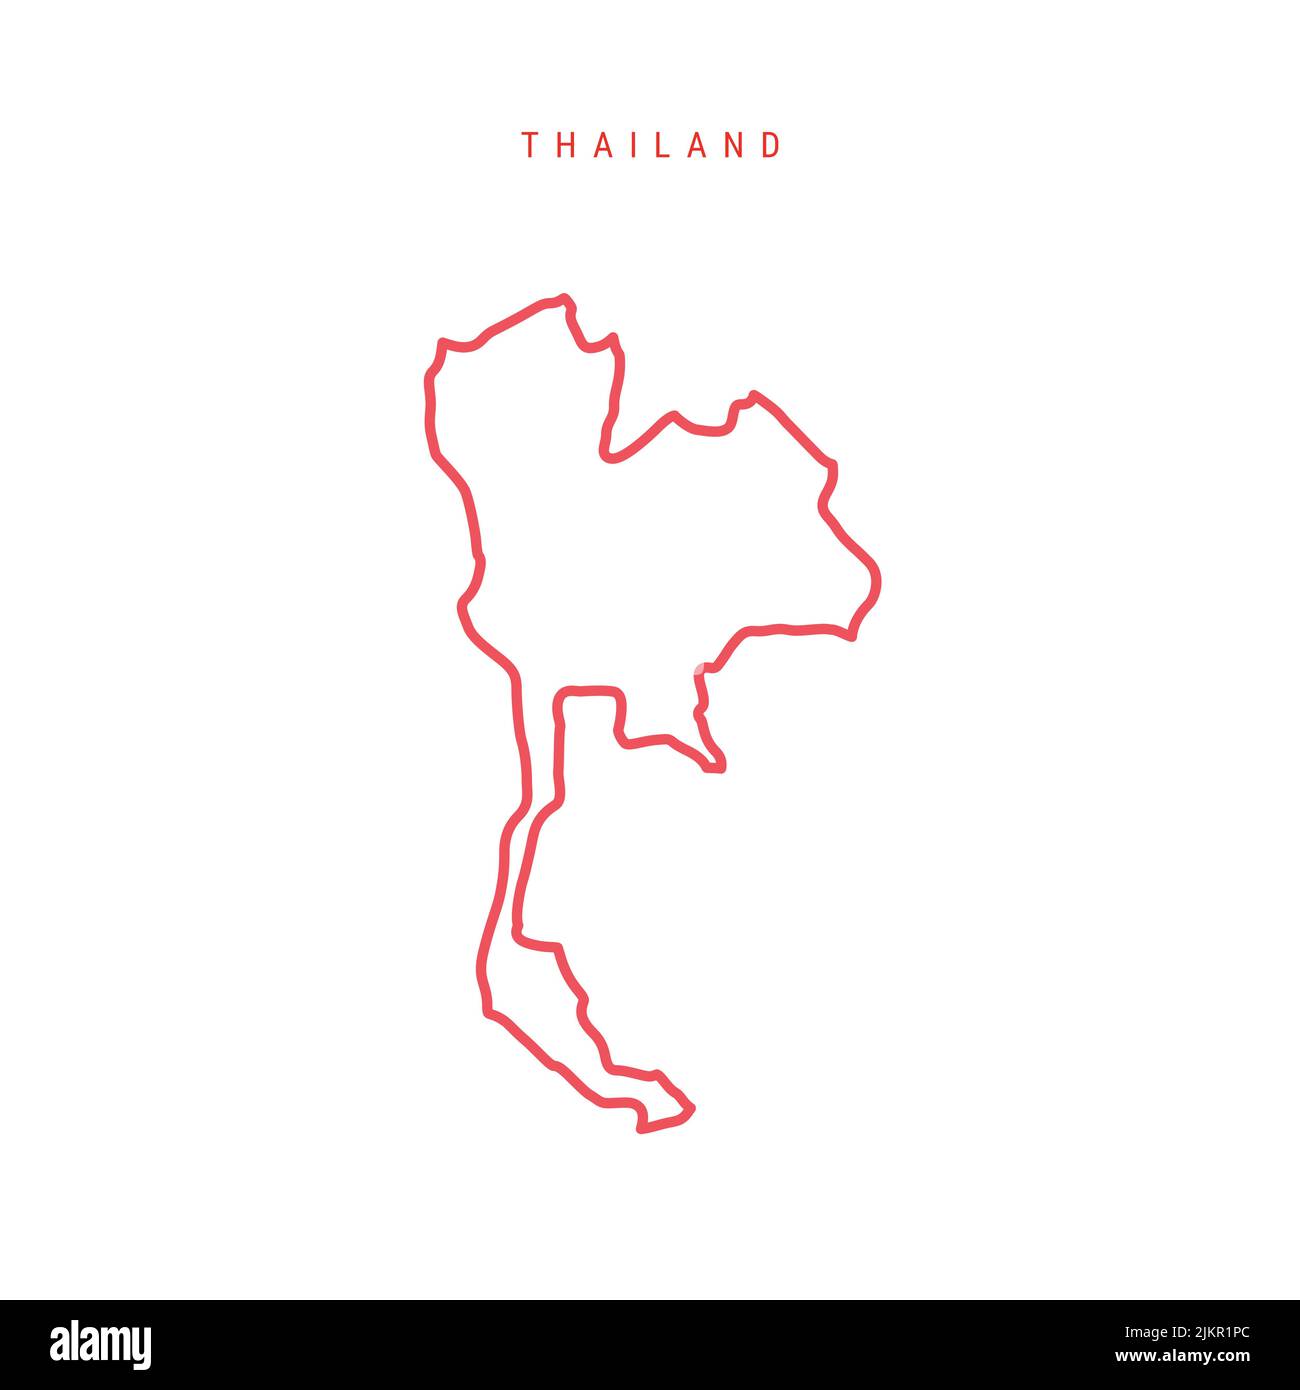 Thailand editable outline map. Thai red border. Country name. Adjust line weight. Change to any color. Vector illustration. Stock Vector